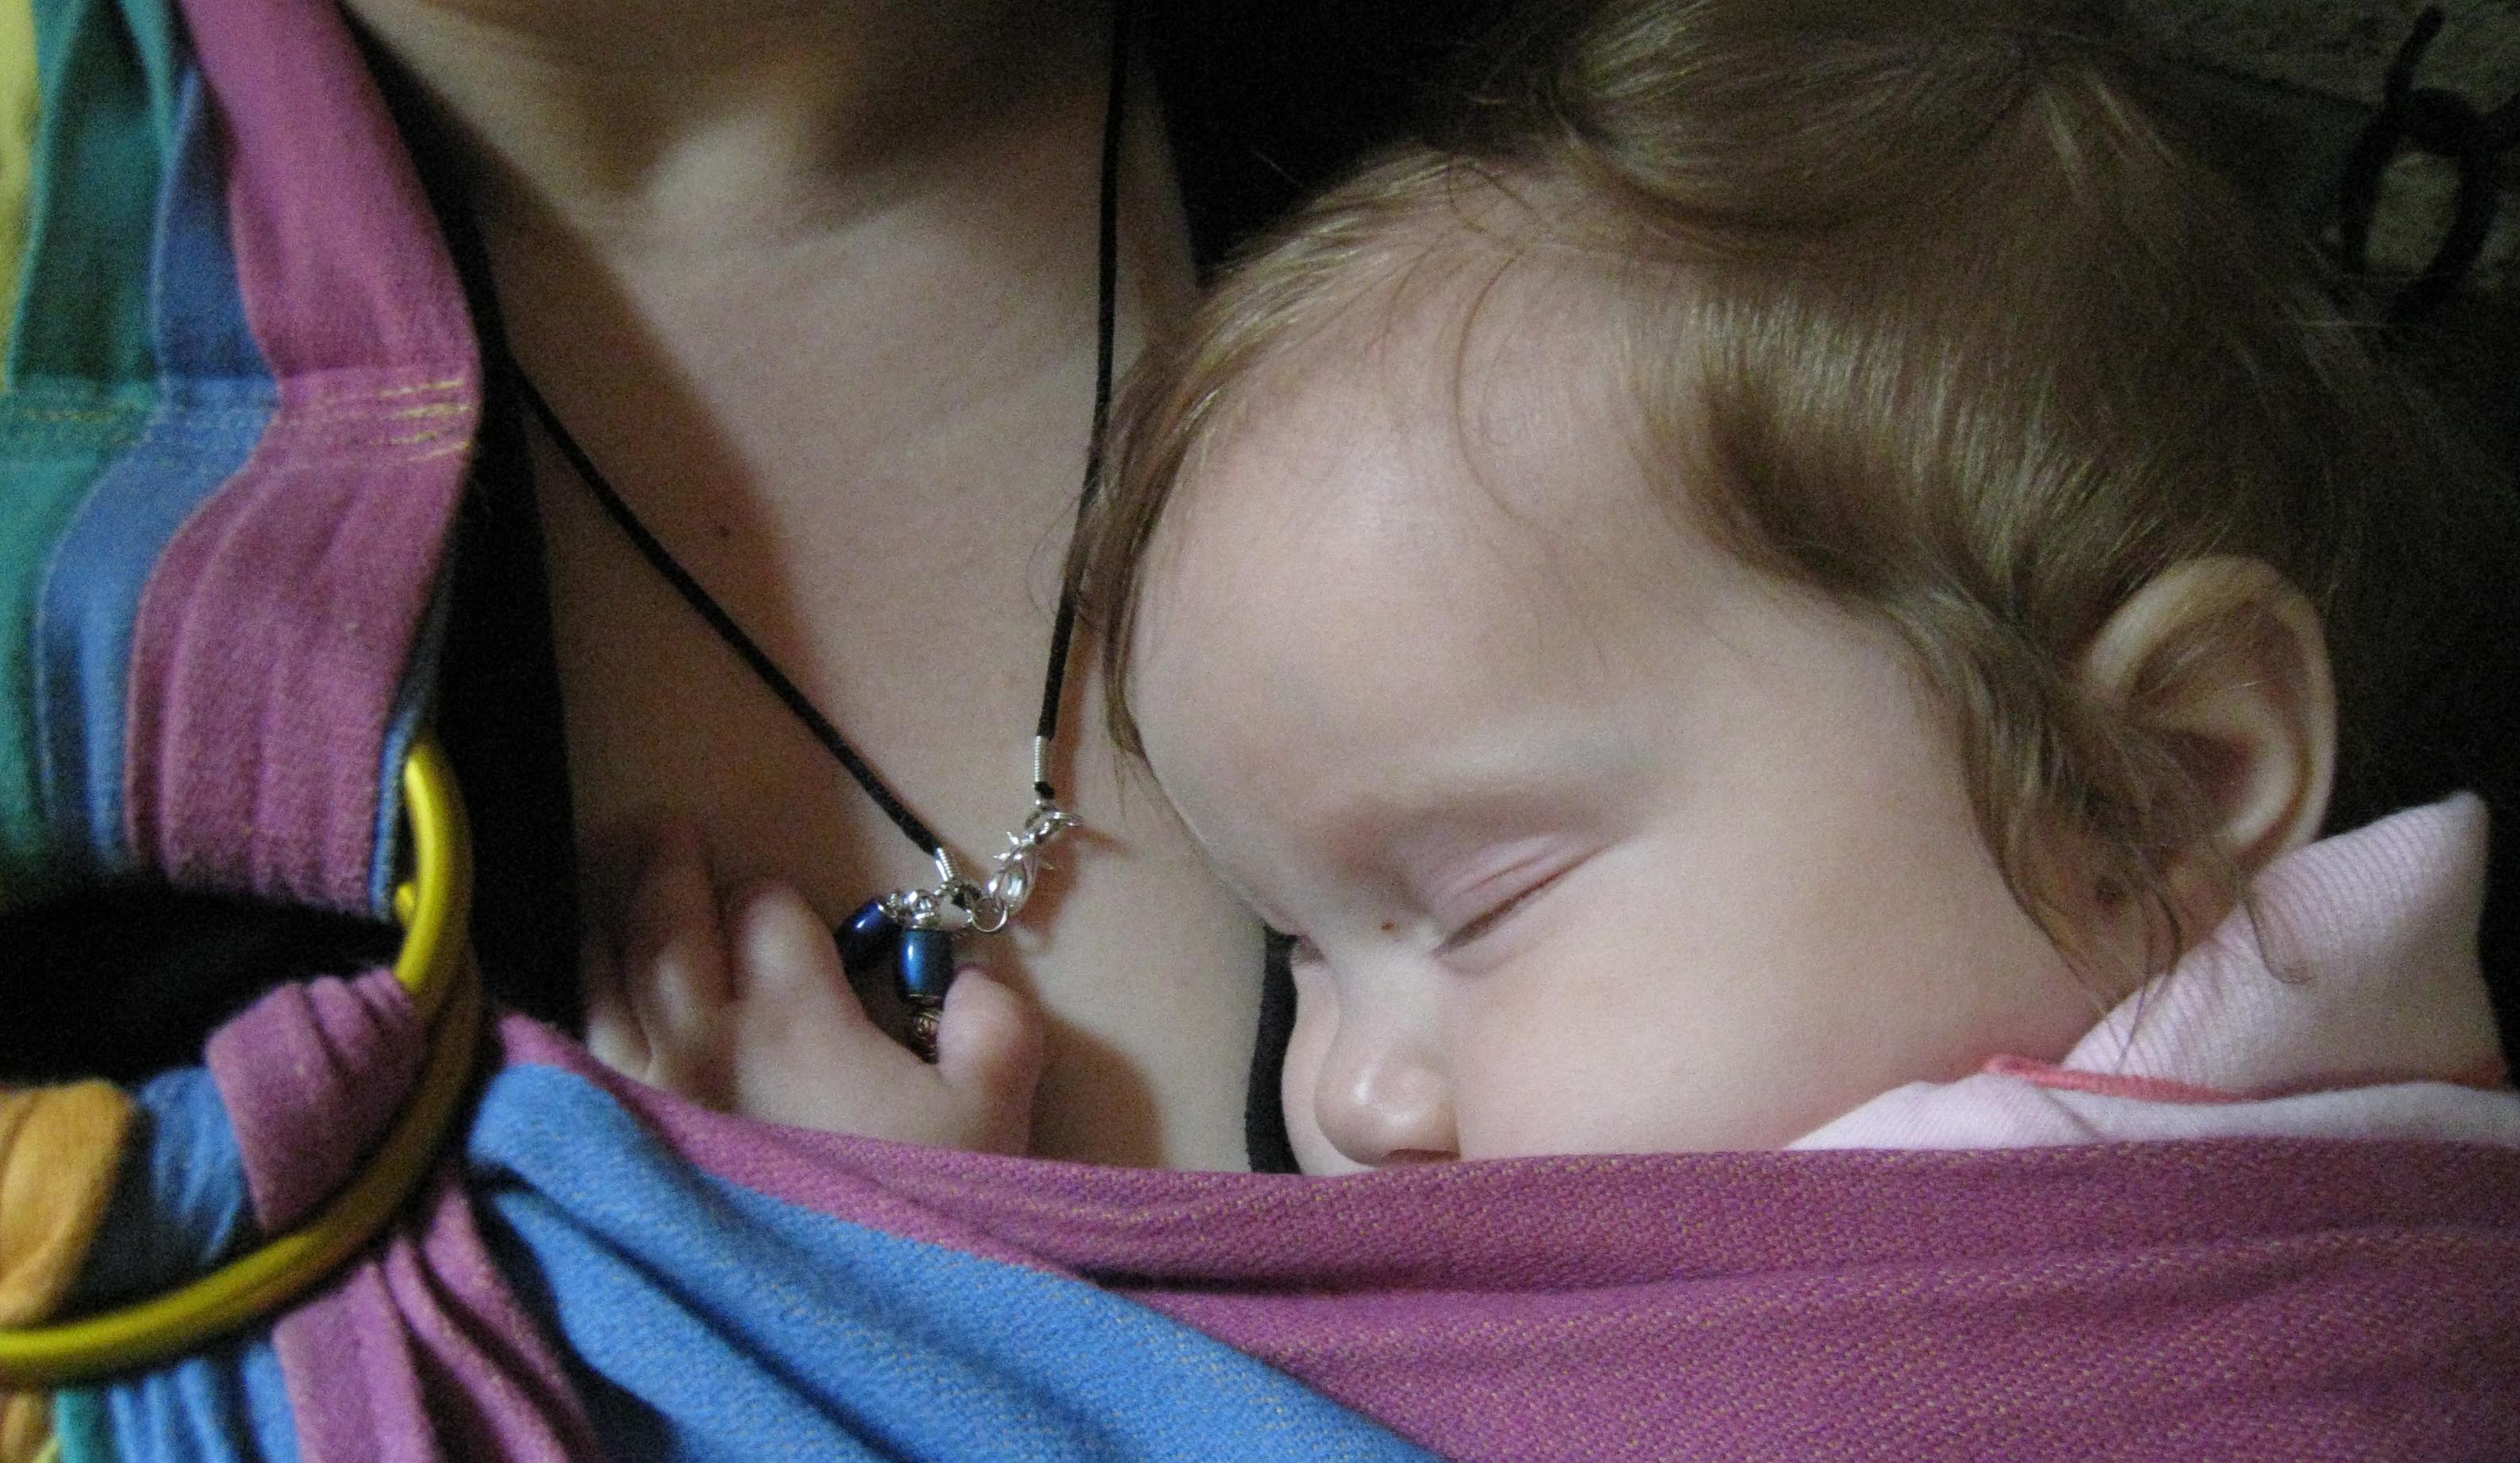 The third 'sleeping baby' in a long-discontinued, but still very loved, rainbow sling, 14 years ago